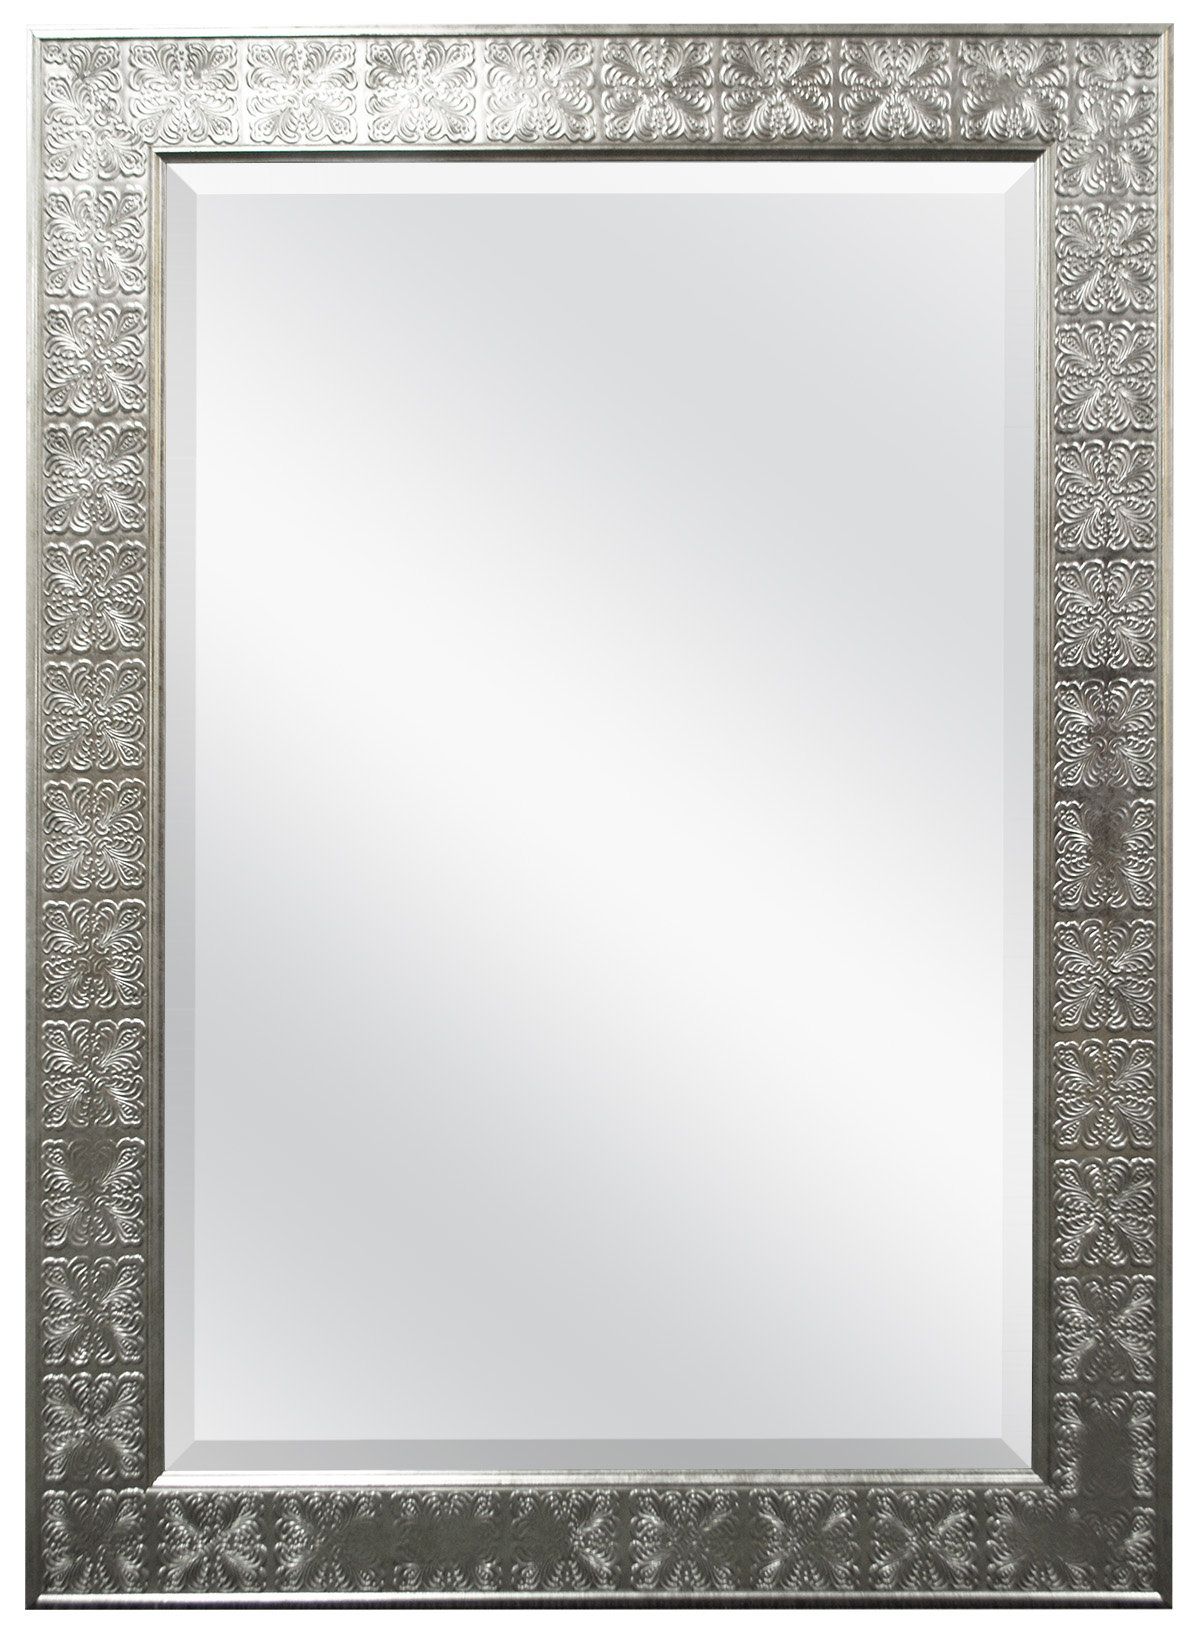 Medallion Accent Mirror Throughout Most Current Medallion Accent Mirrors (View 6 of 20)